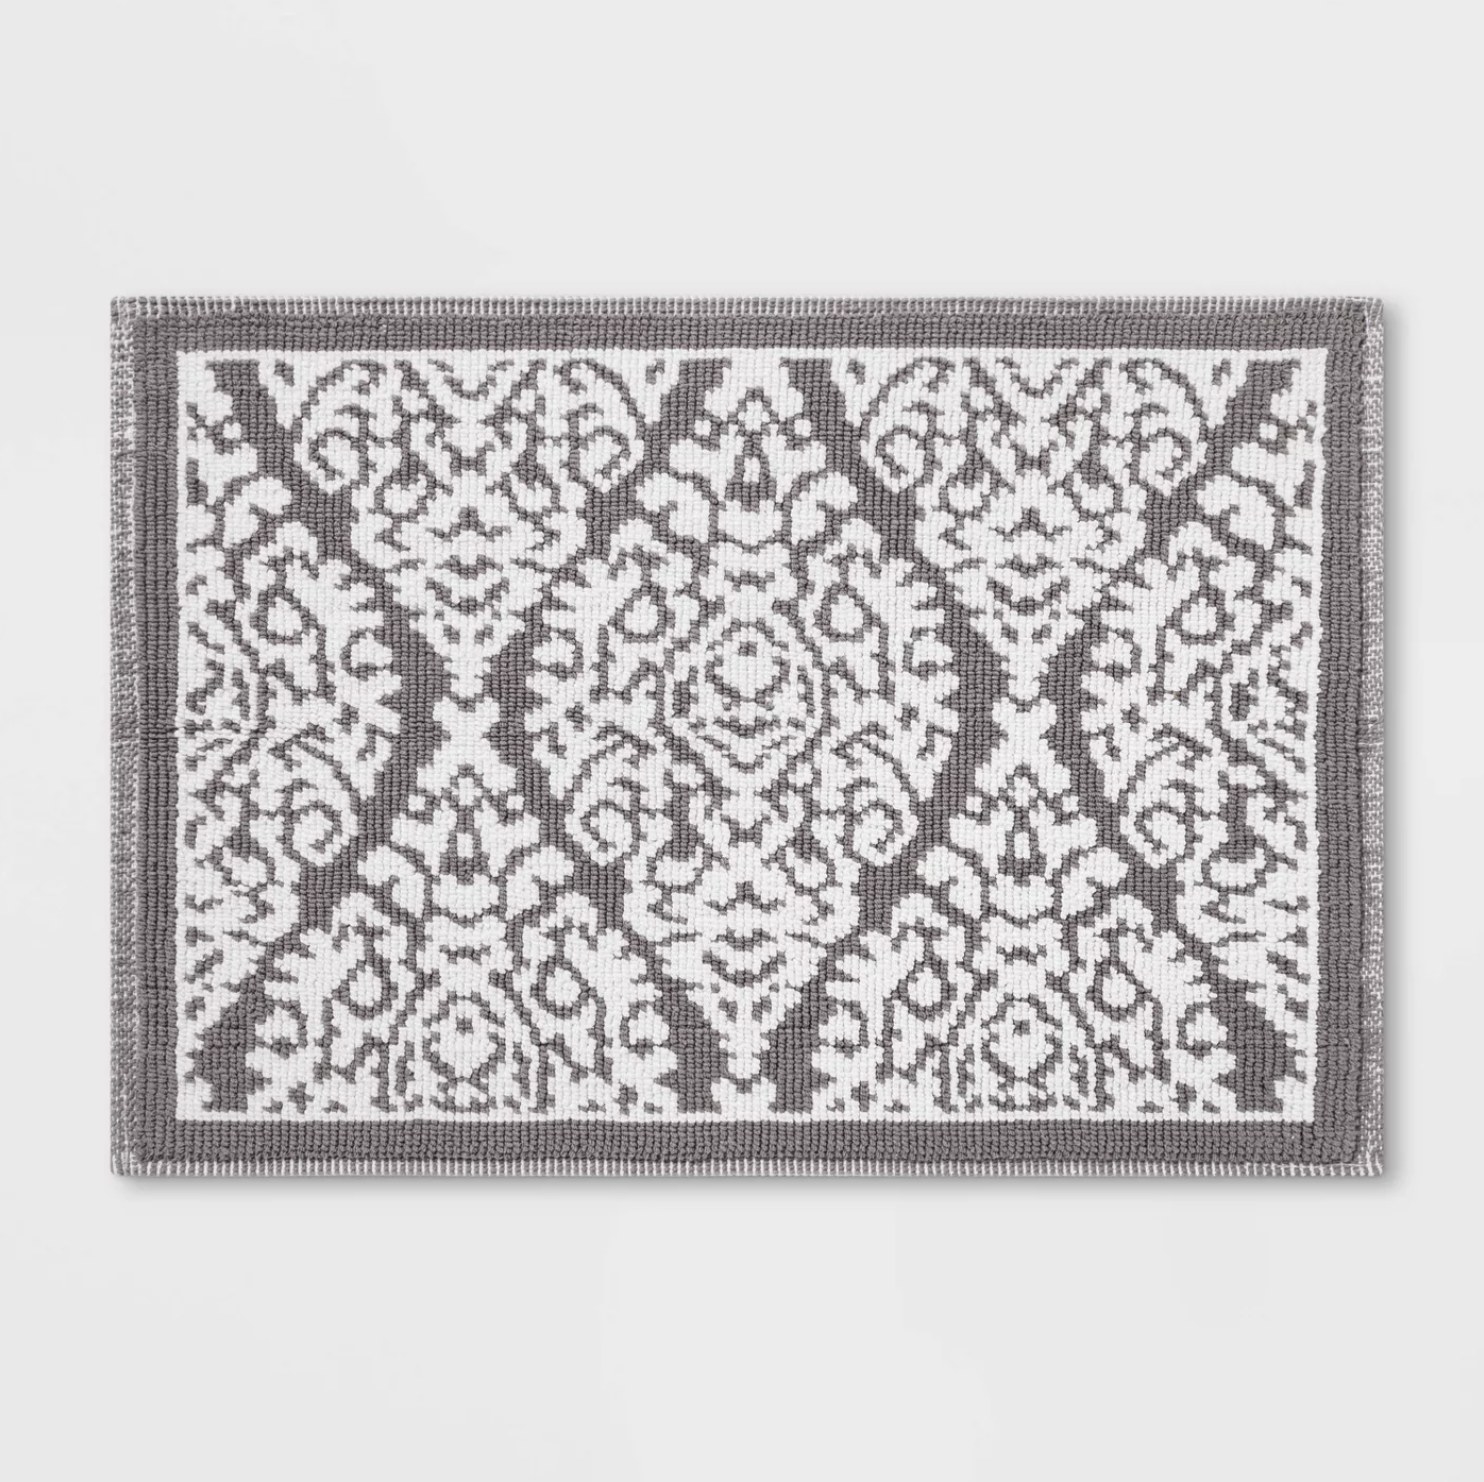 A gray and white patterned bath mat 